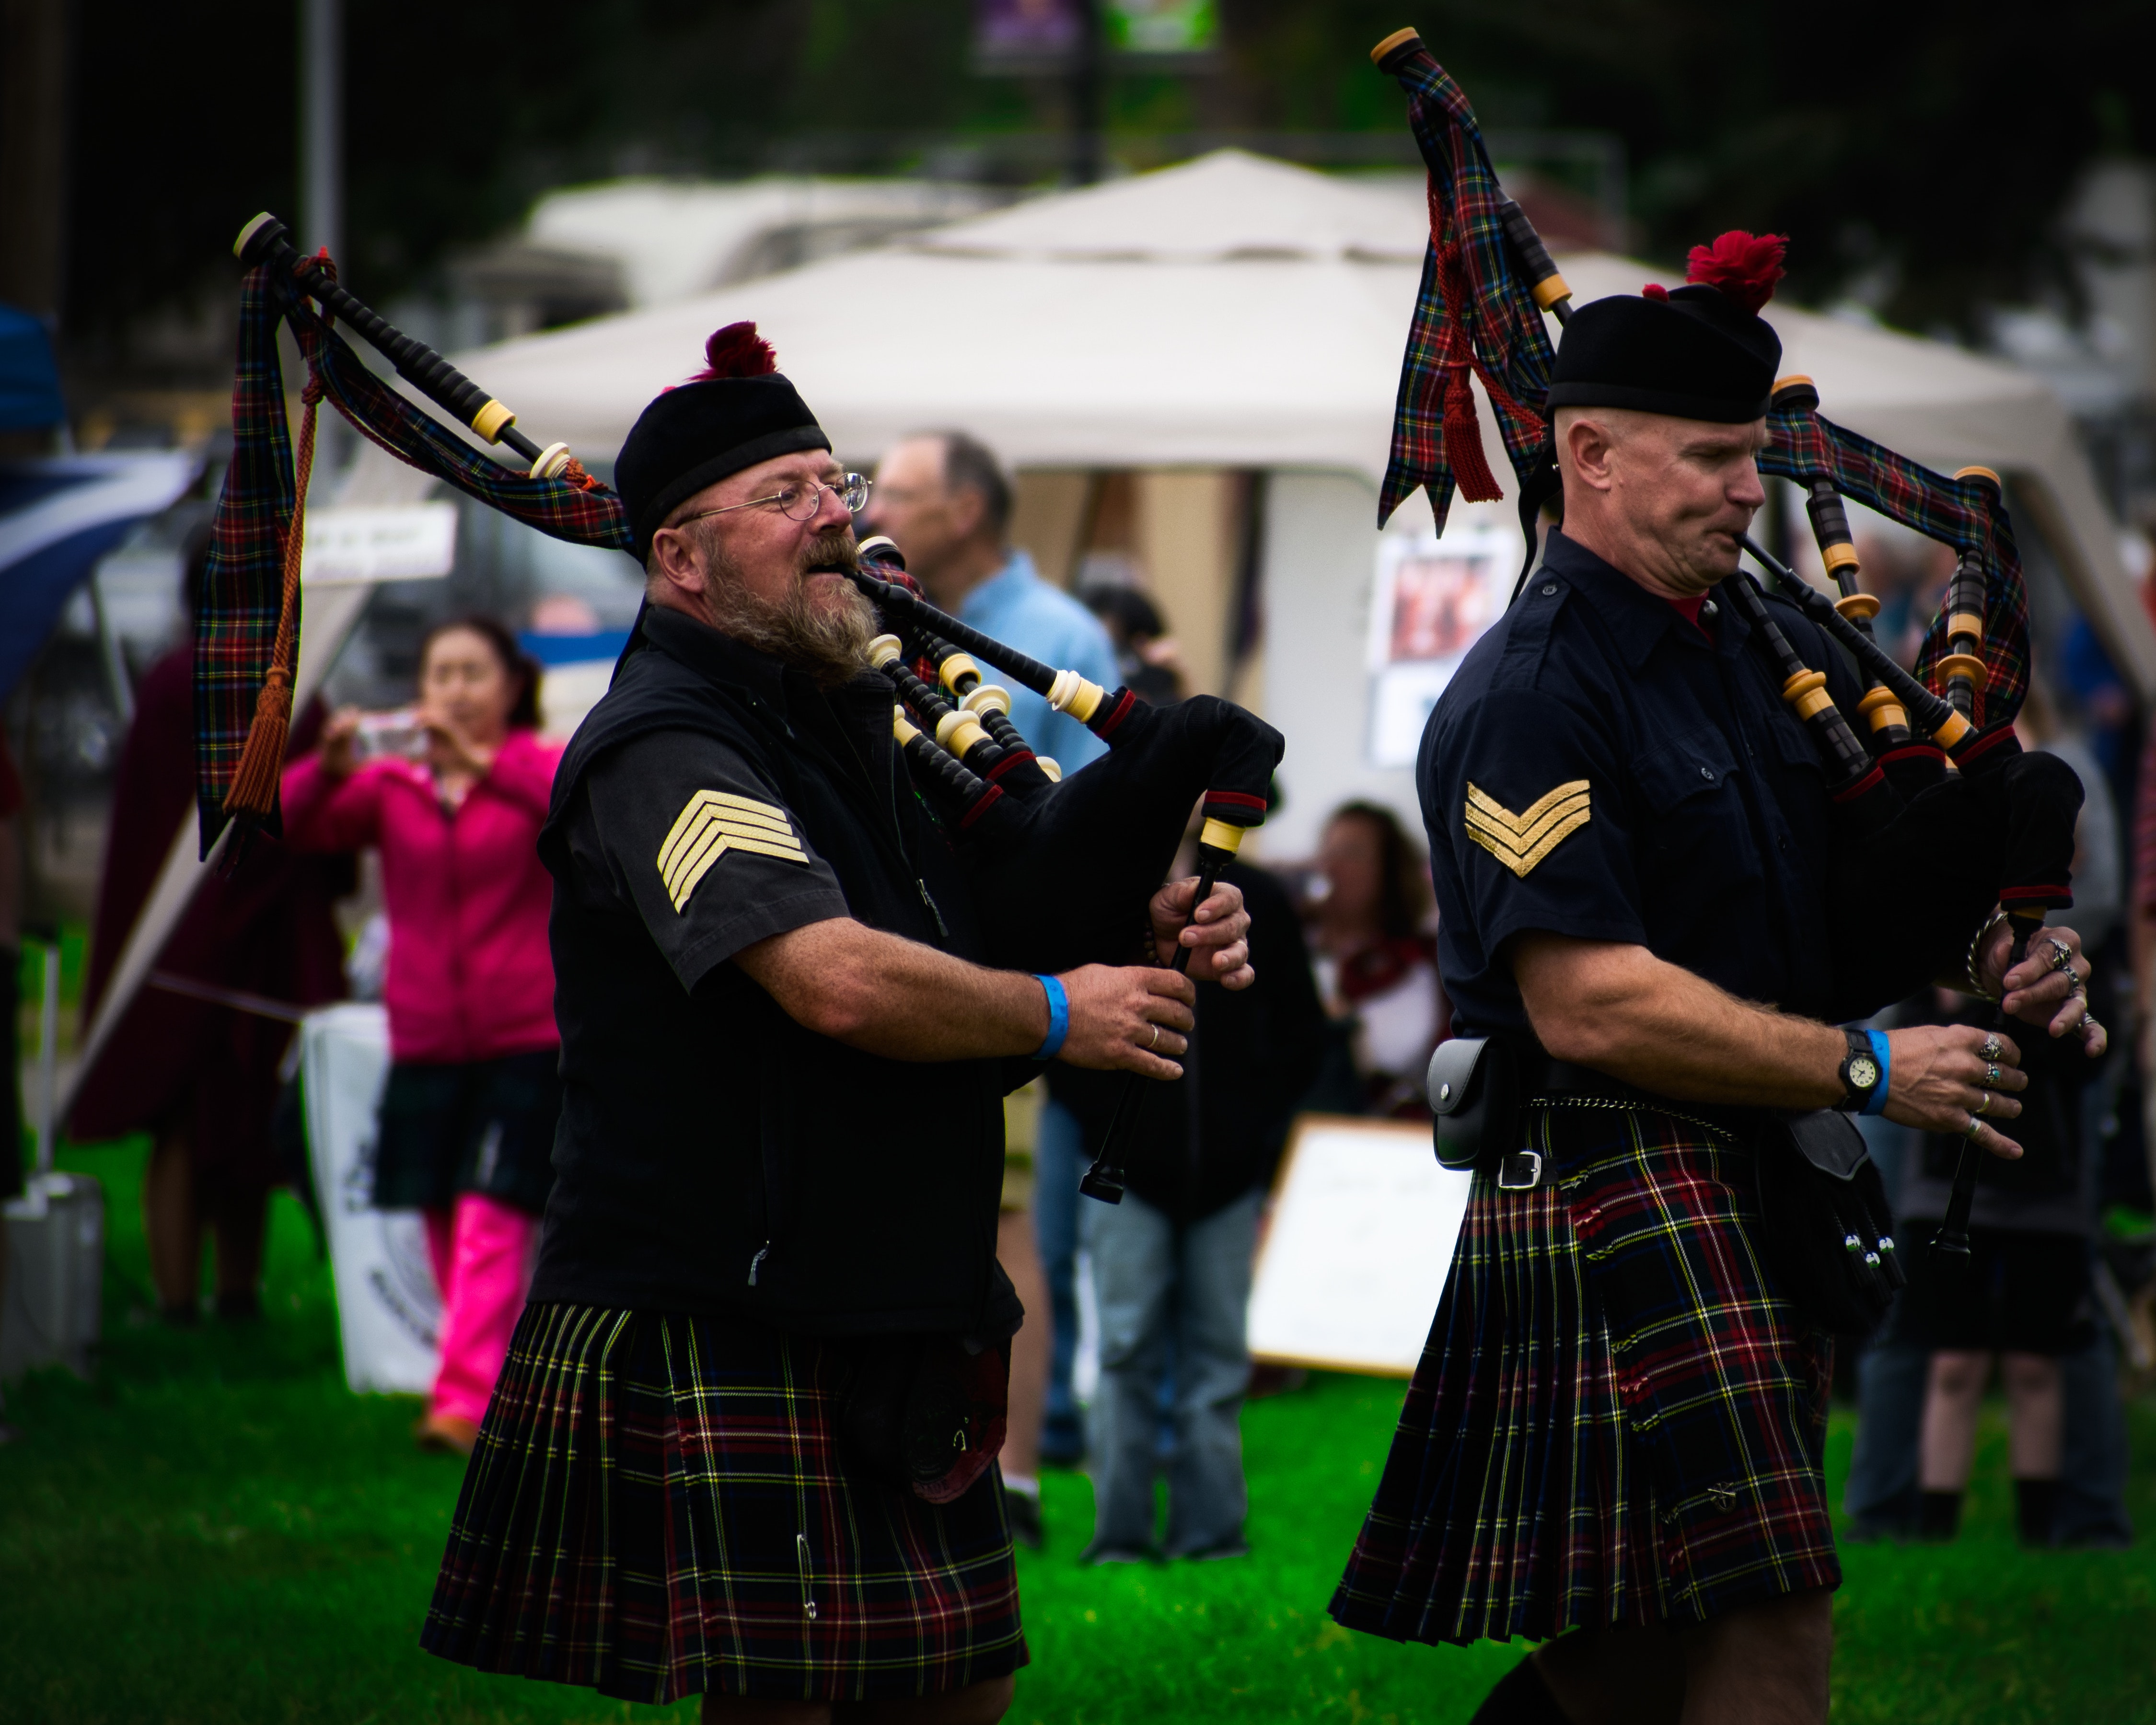 Interesting Bagpipes Photo